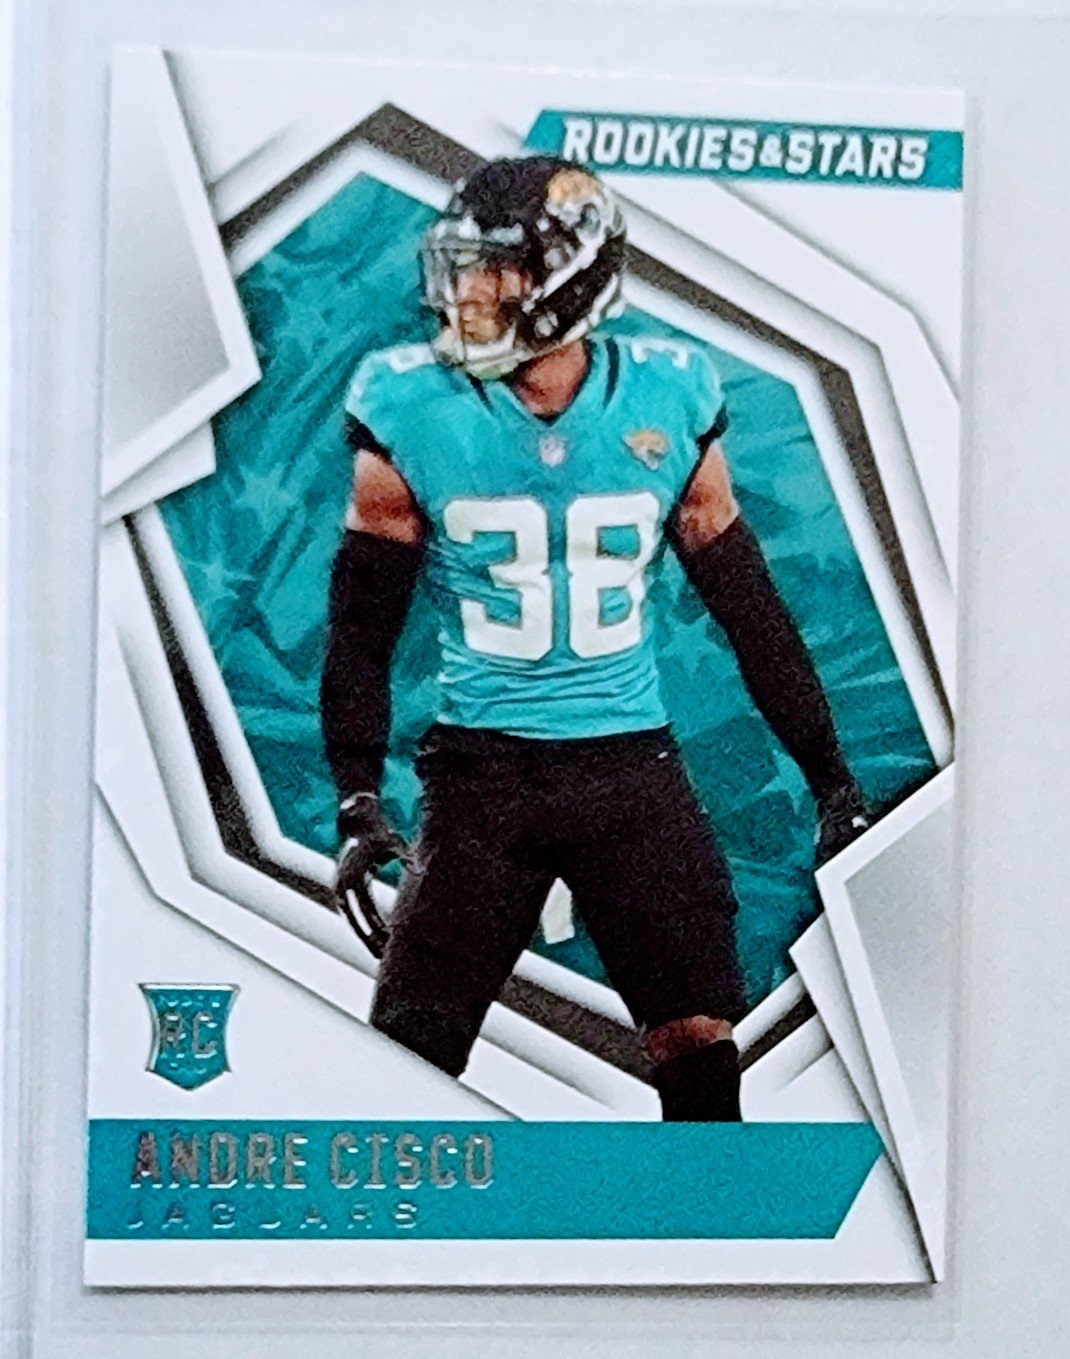 2021 Panini Rookies and Stars Andre Cisco Rookie Football Card AVM1 simple Xclusive Collectibles   